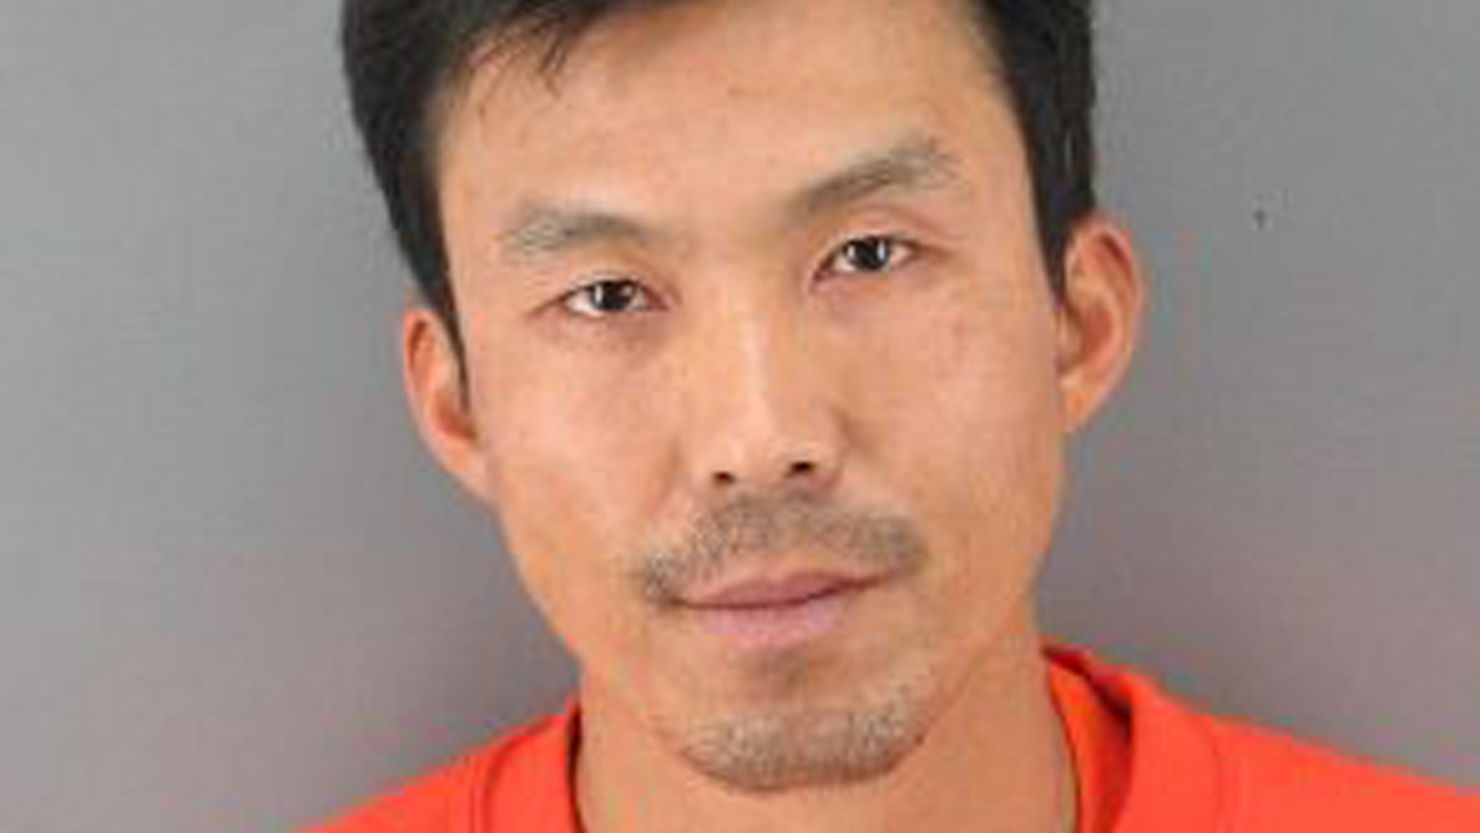 Binh Thai Luc, 35, was arrested in San Francisco on Sunday and charged with five counts of murder.